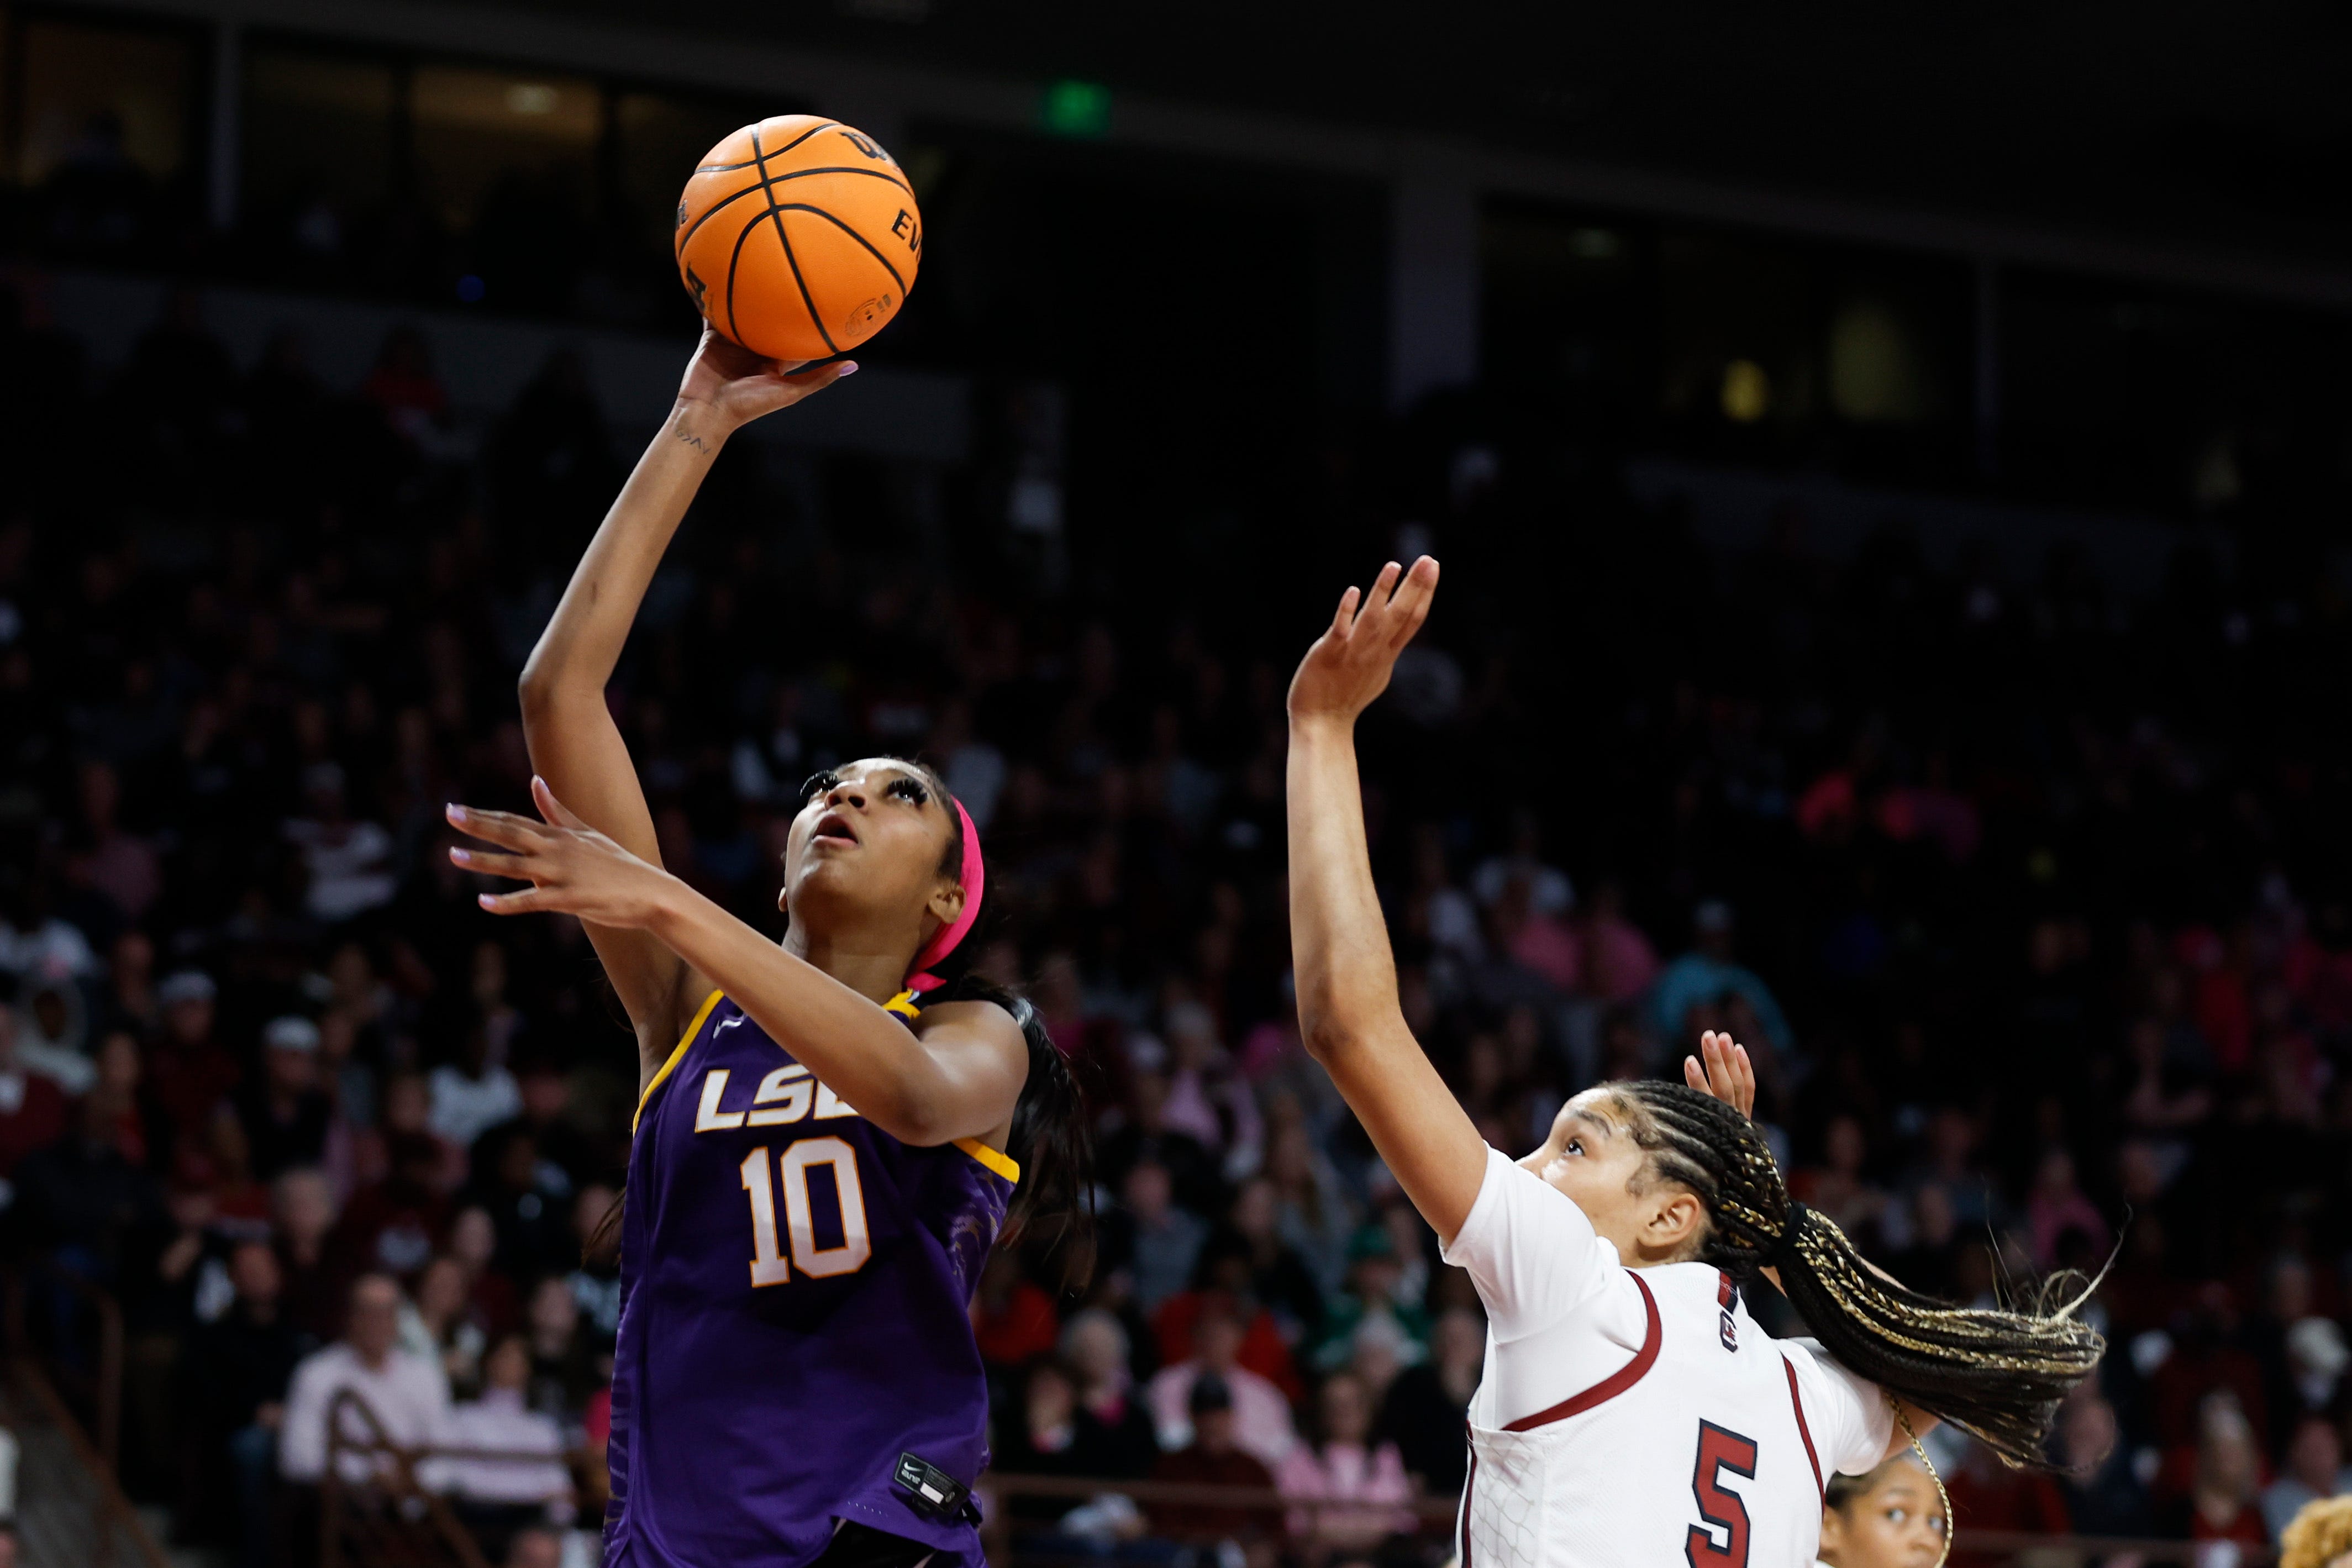 LSU forward Angel Reese (10) shoots ahead of South Carolina forward Victaria Saxton during the second half of an NCAA college basketball game in Columbia, S.C., Sunday, Feb. 12, 2023. South Carolina won 88-64. (AP Photo/Nell Redmond)